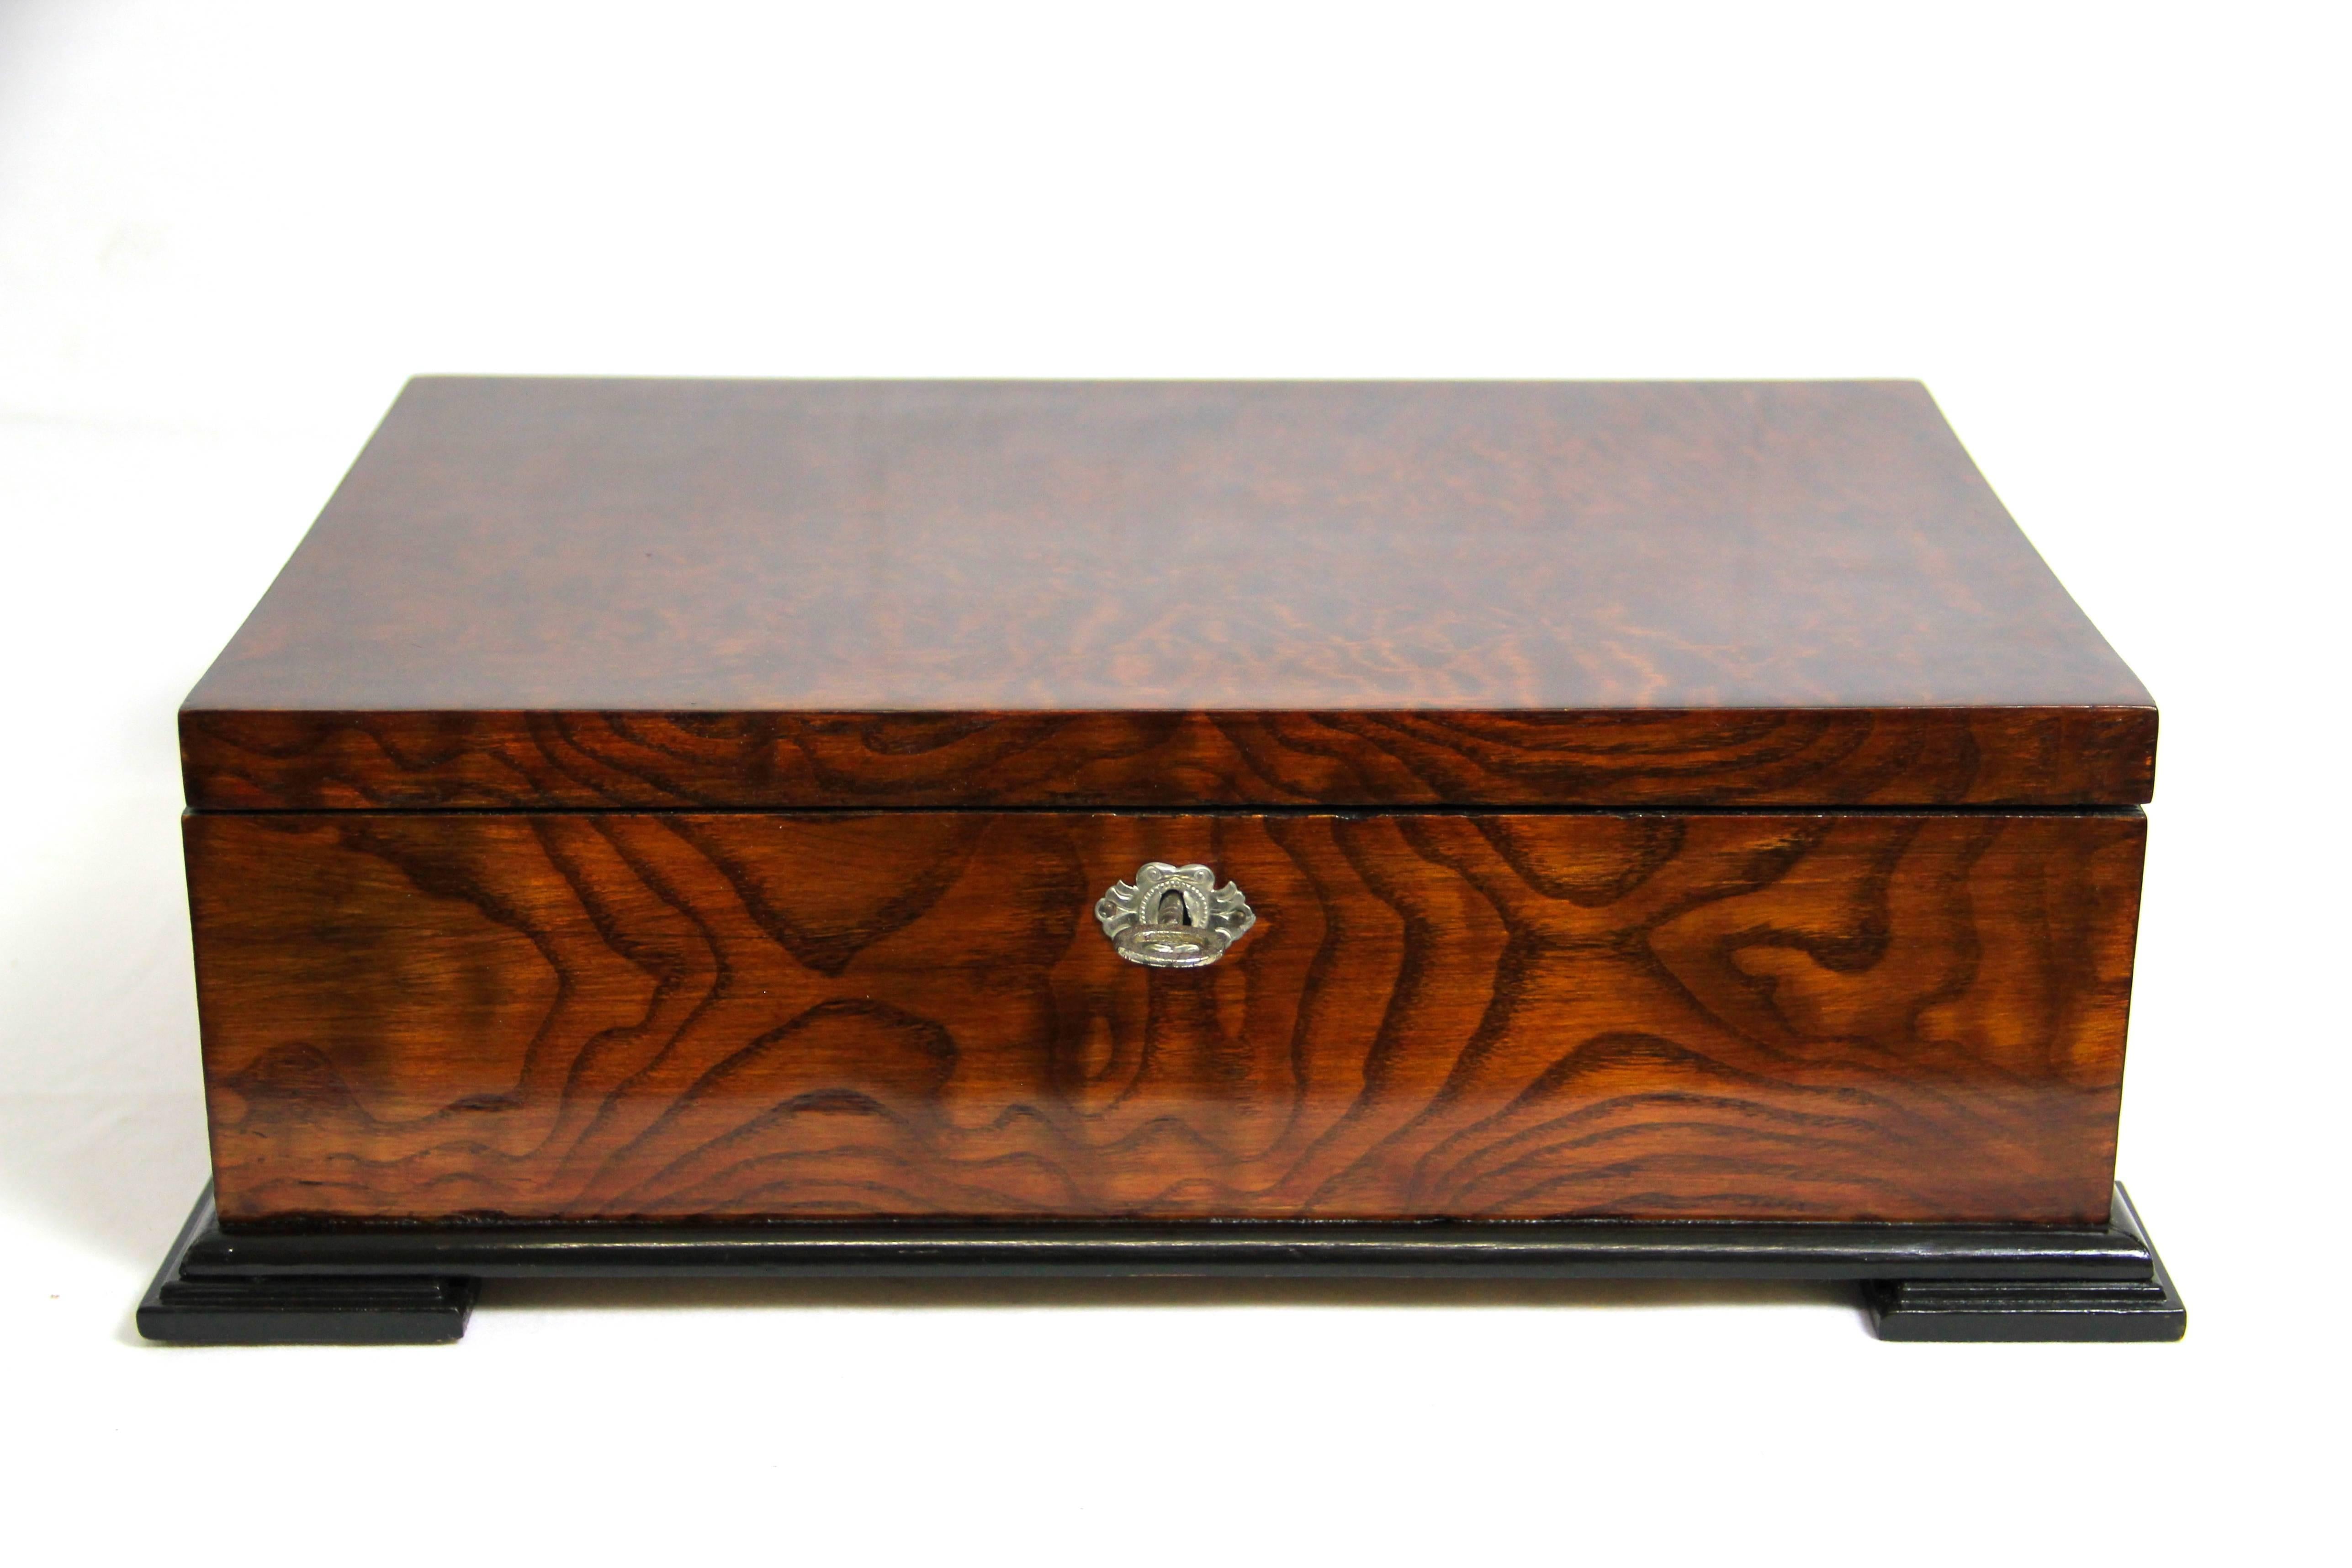 Wonderful wooden box from the Art Nouveau era. Amazing veneer work with tropical wood on the cover, ashwood on the body and nut wood inside - this decorative box can be used in many ways. The ebonized base builds a perfect harmony along the